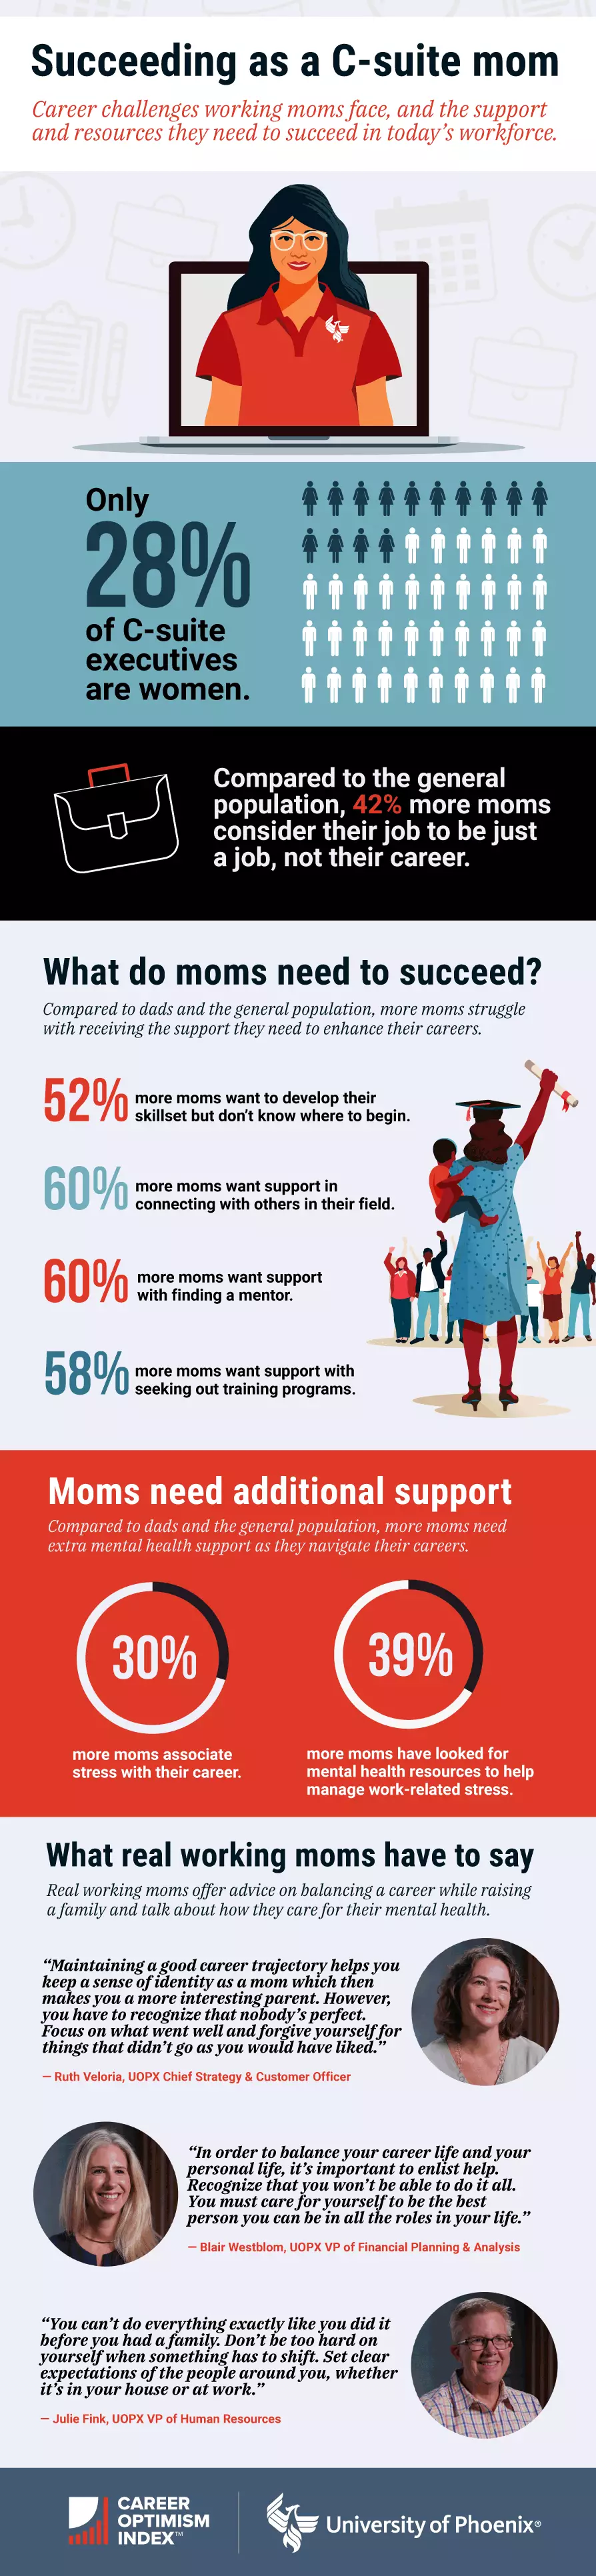 Succeeding as a C-suite mom - infographic